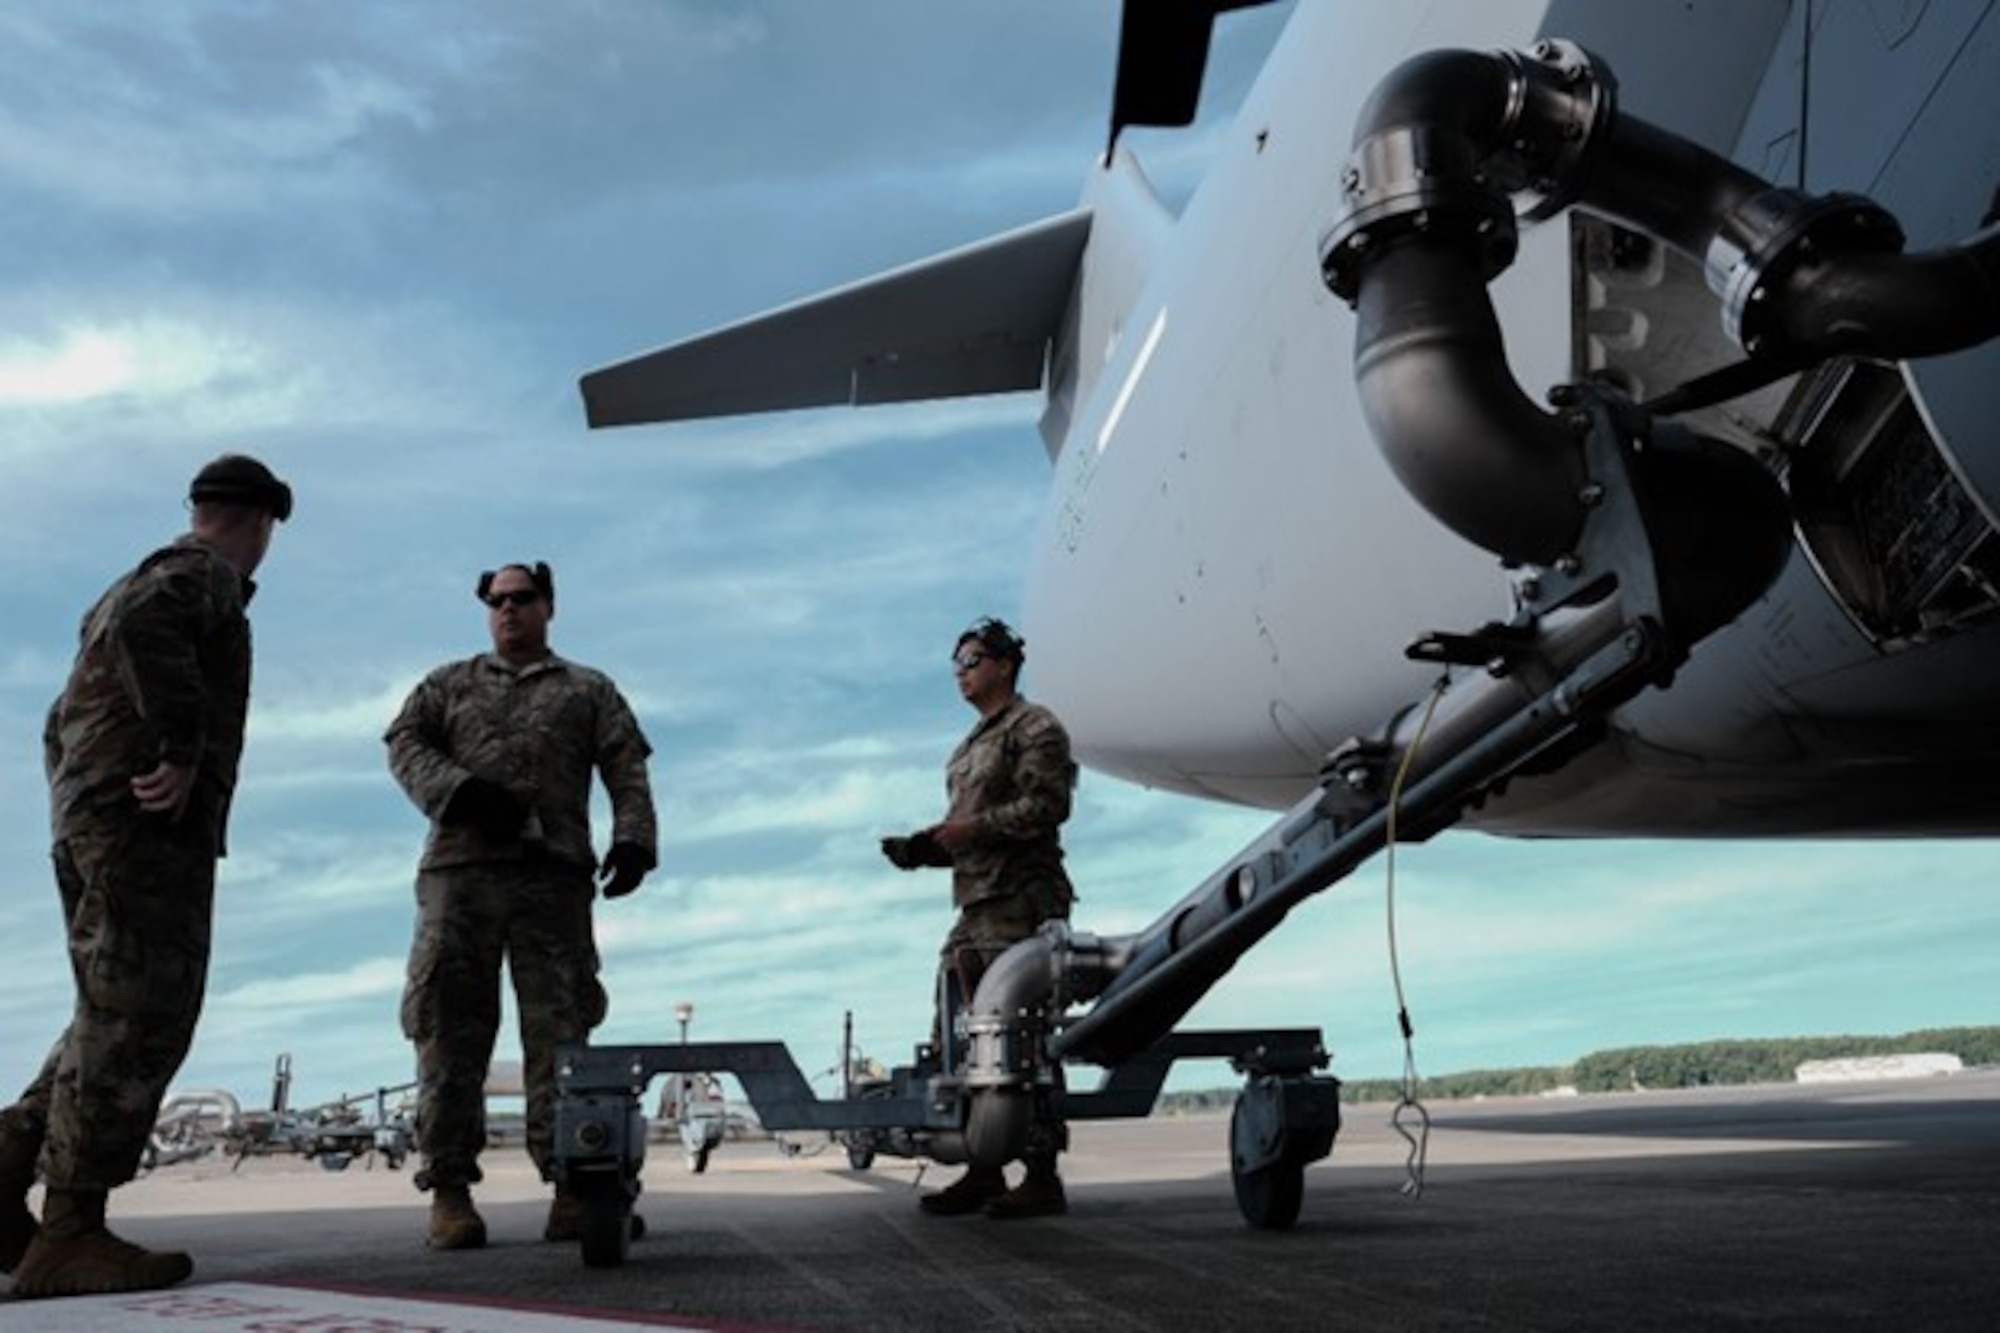 Airmen assigned to the 305th Aircraft Maintenance Squadron and 621st Contingency Response Wing refuel a C-17 Globemaster prior to a tactical sortie on Joint Base Langley-Eustis, V.A., Sept. 28, 2022.